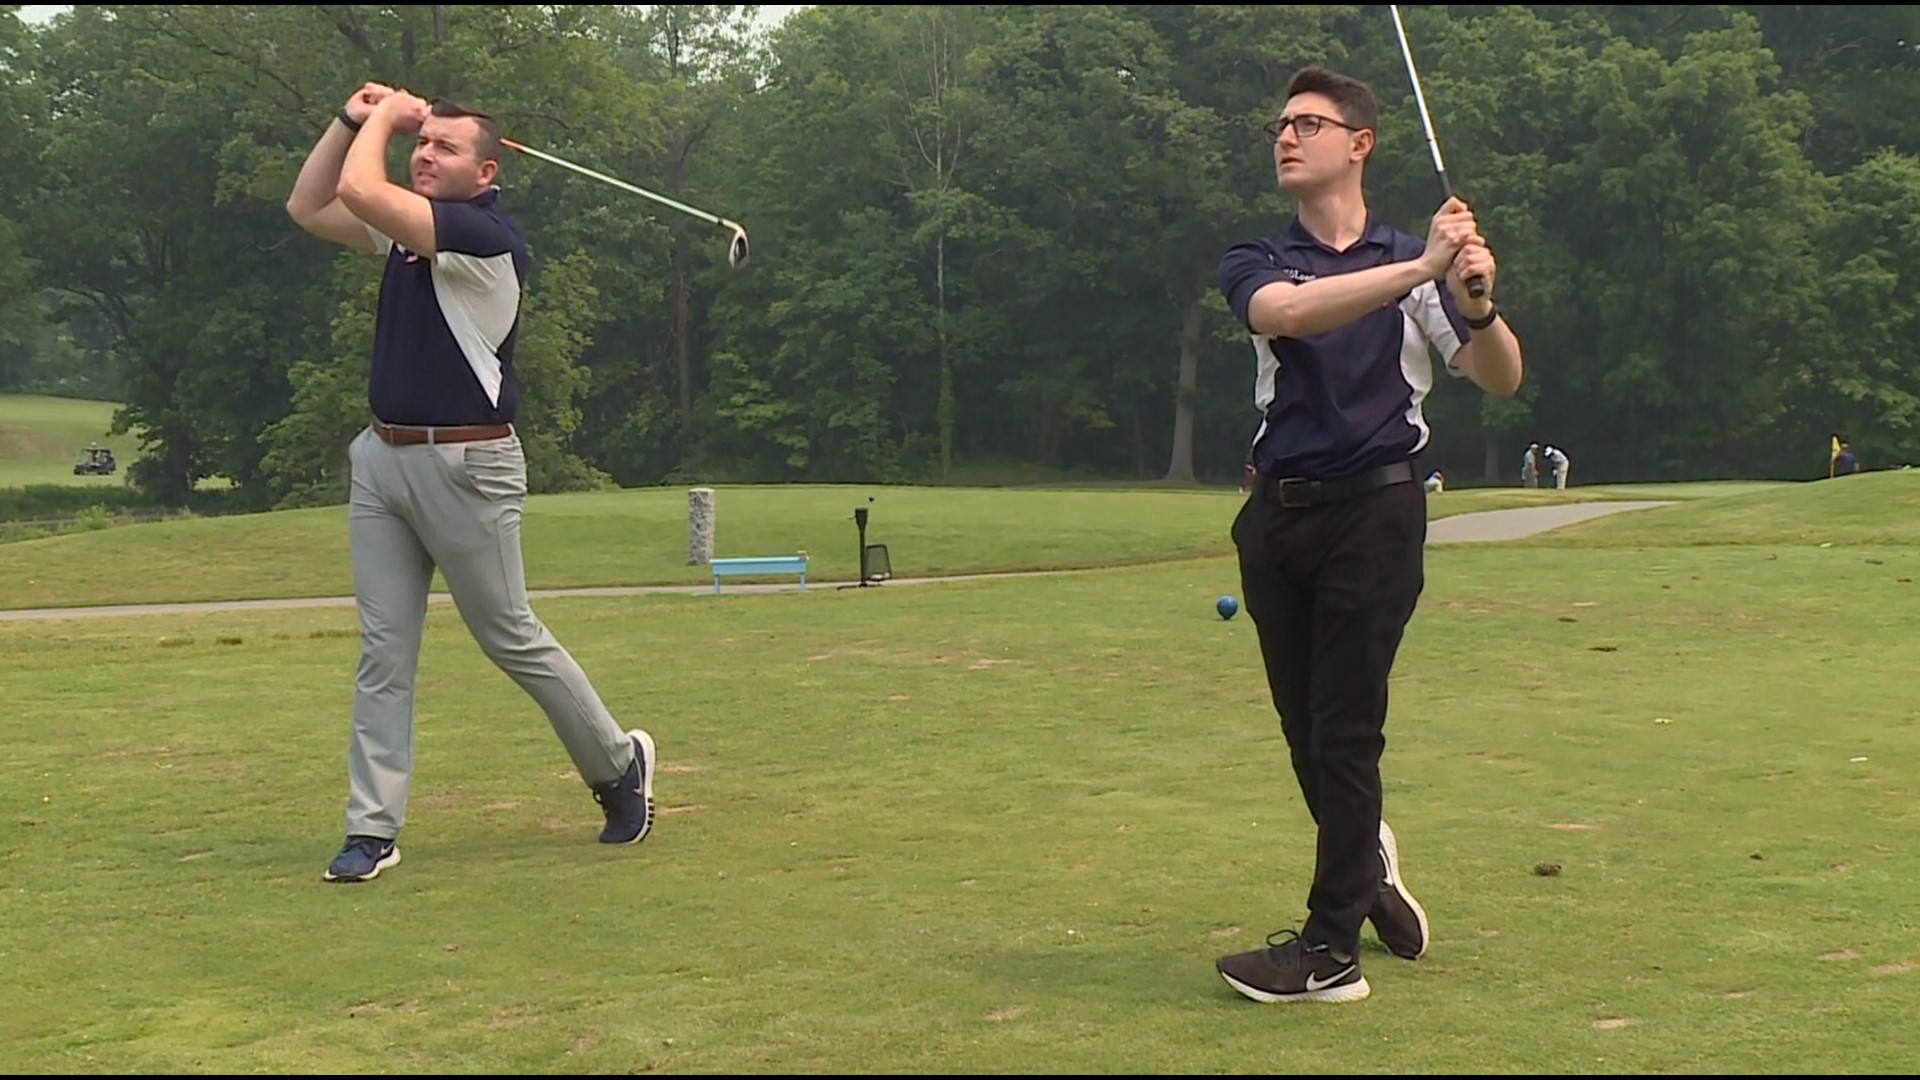 As FOX61 Meteorologist Ryan Breton and Sports Director Jonah Karp analyze the world-class golfers coming to Connecticut, they give it a go on the course themselves.